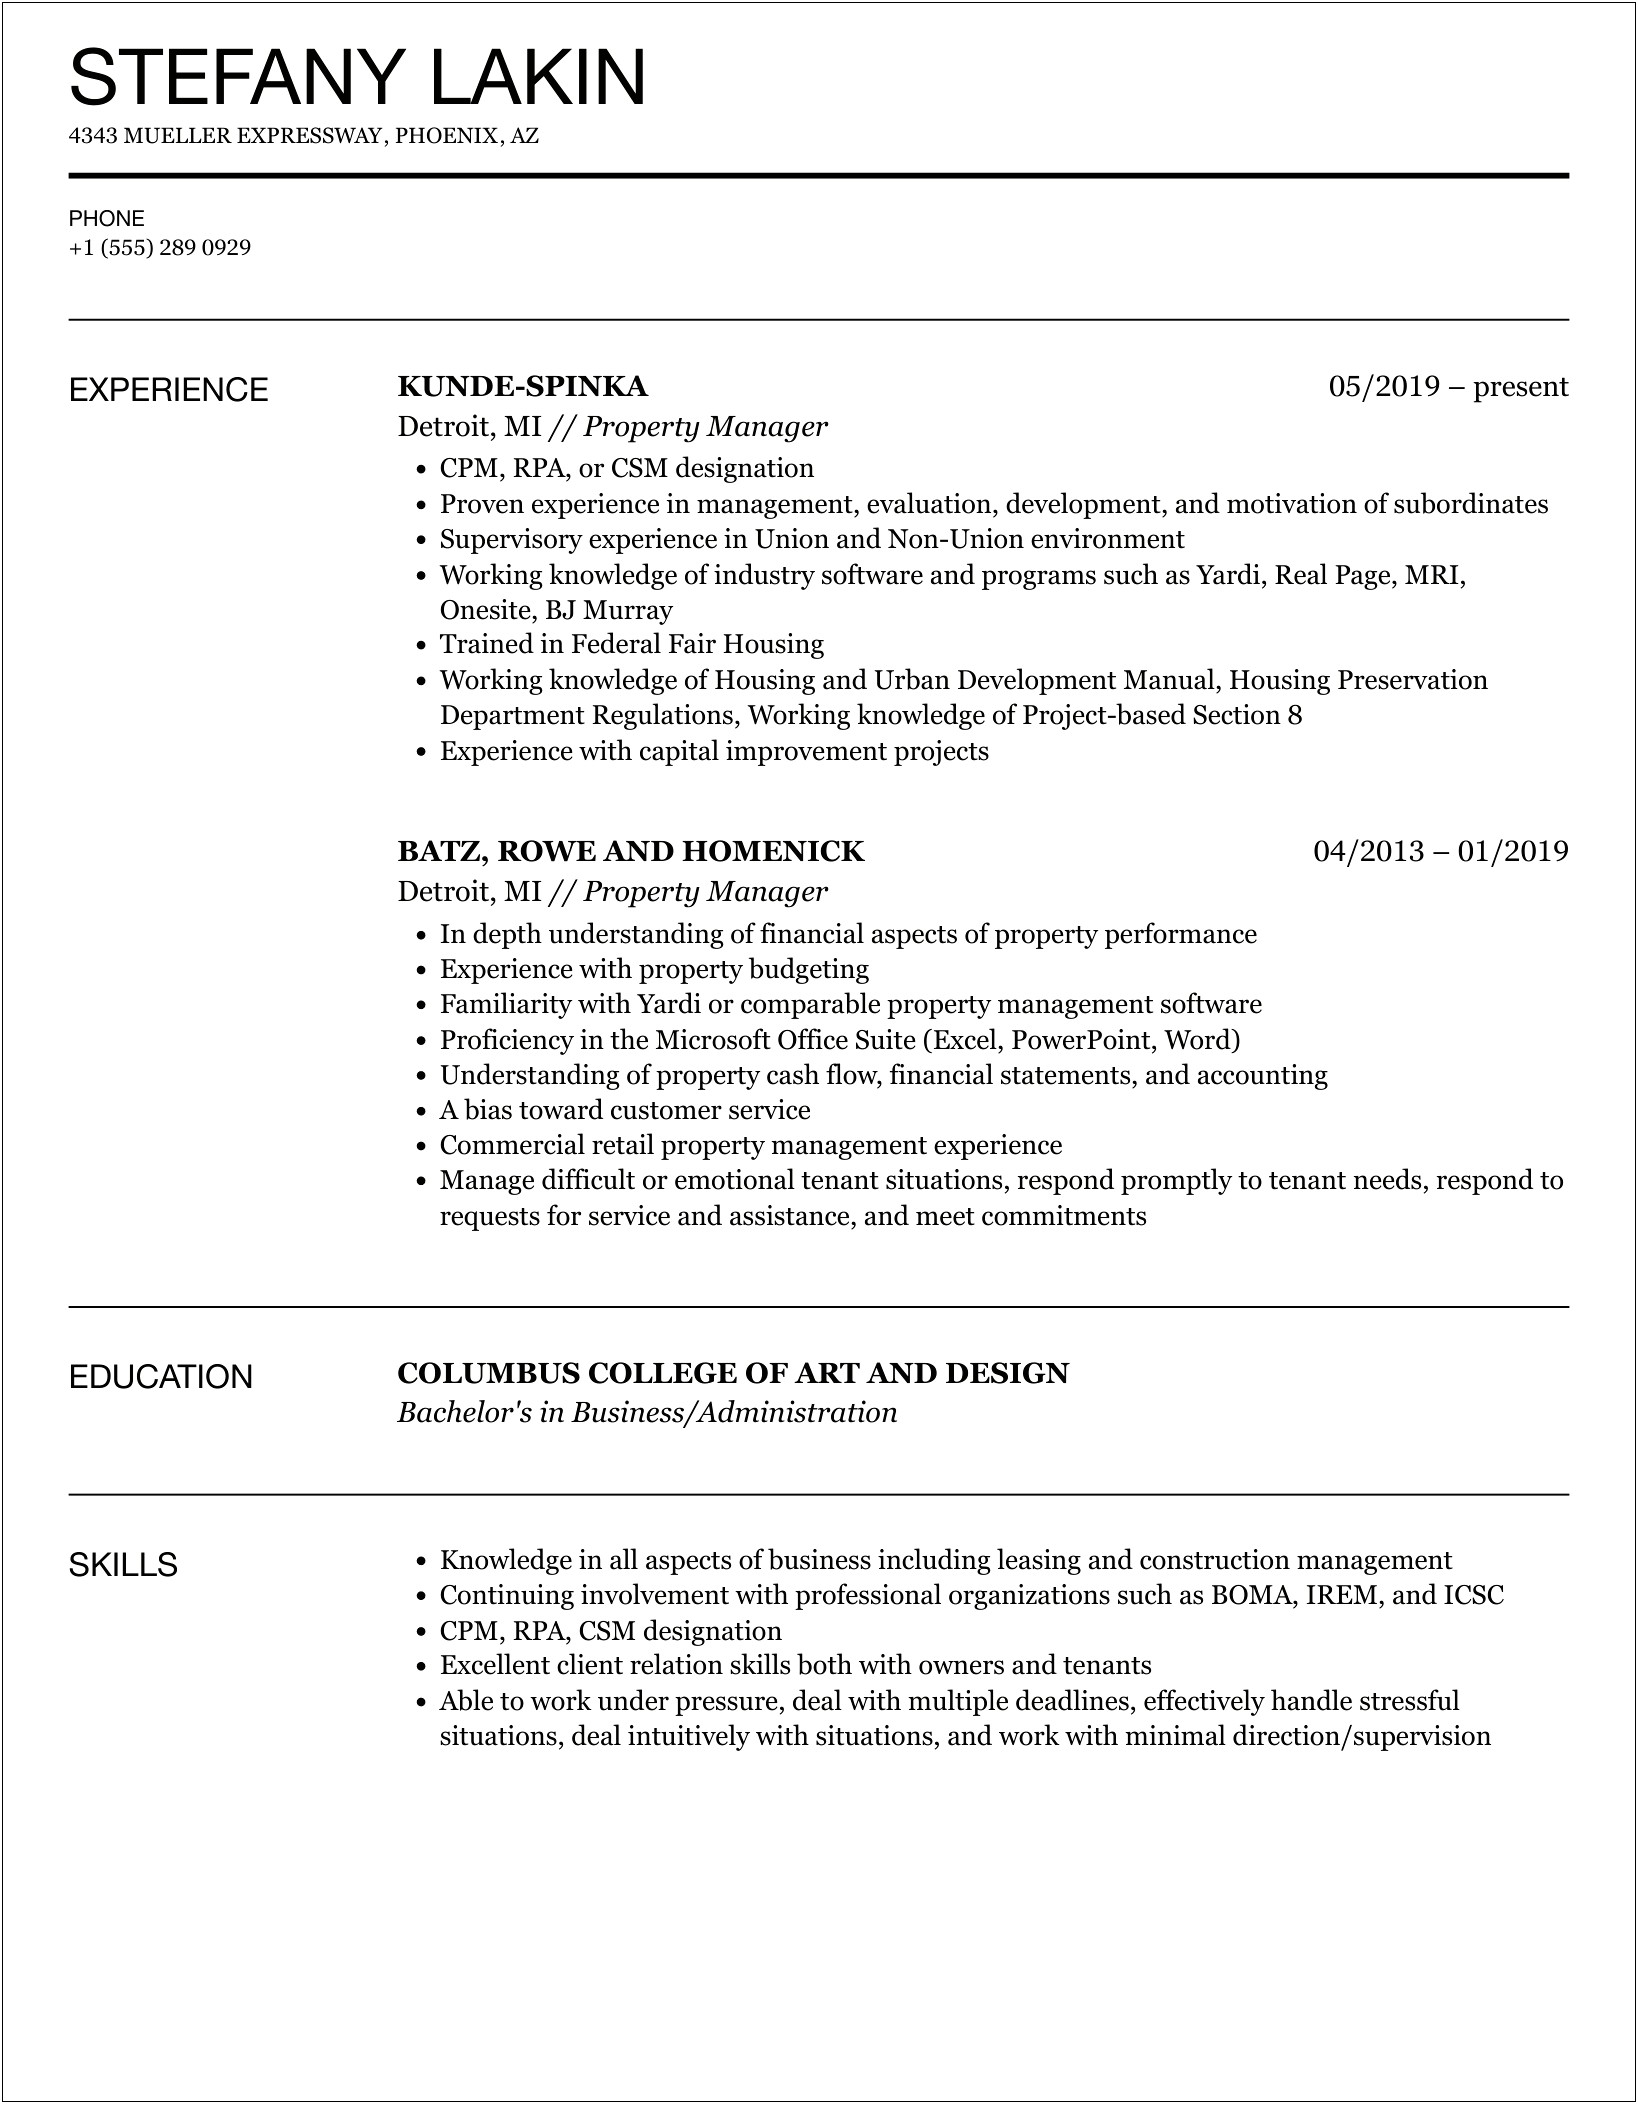 Property Manager Resume With Accomplishments Section